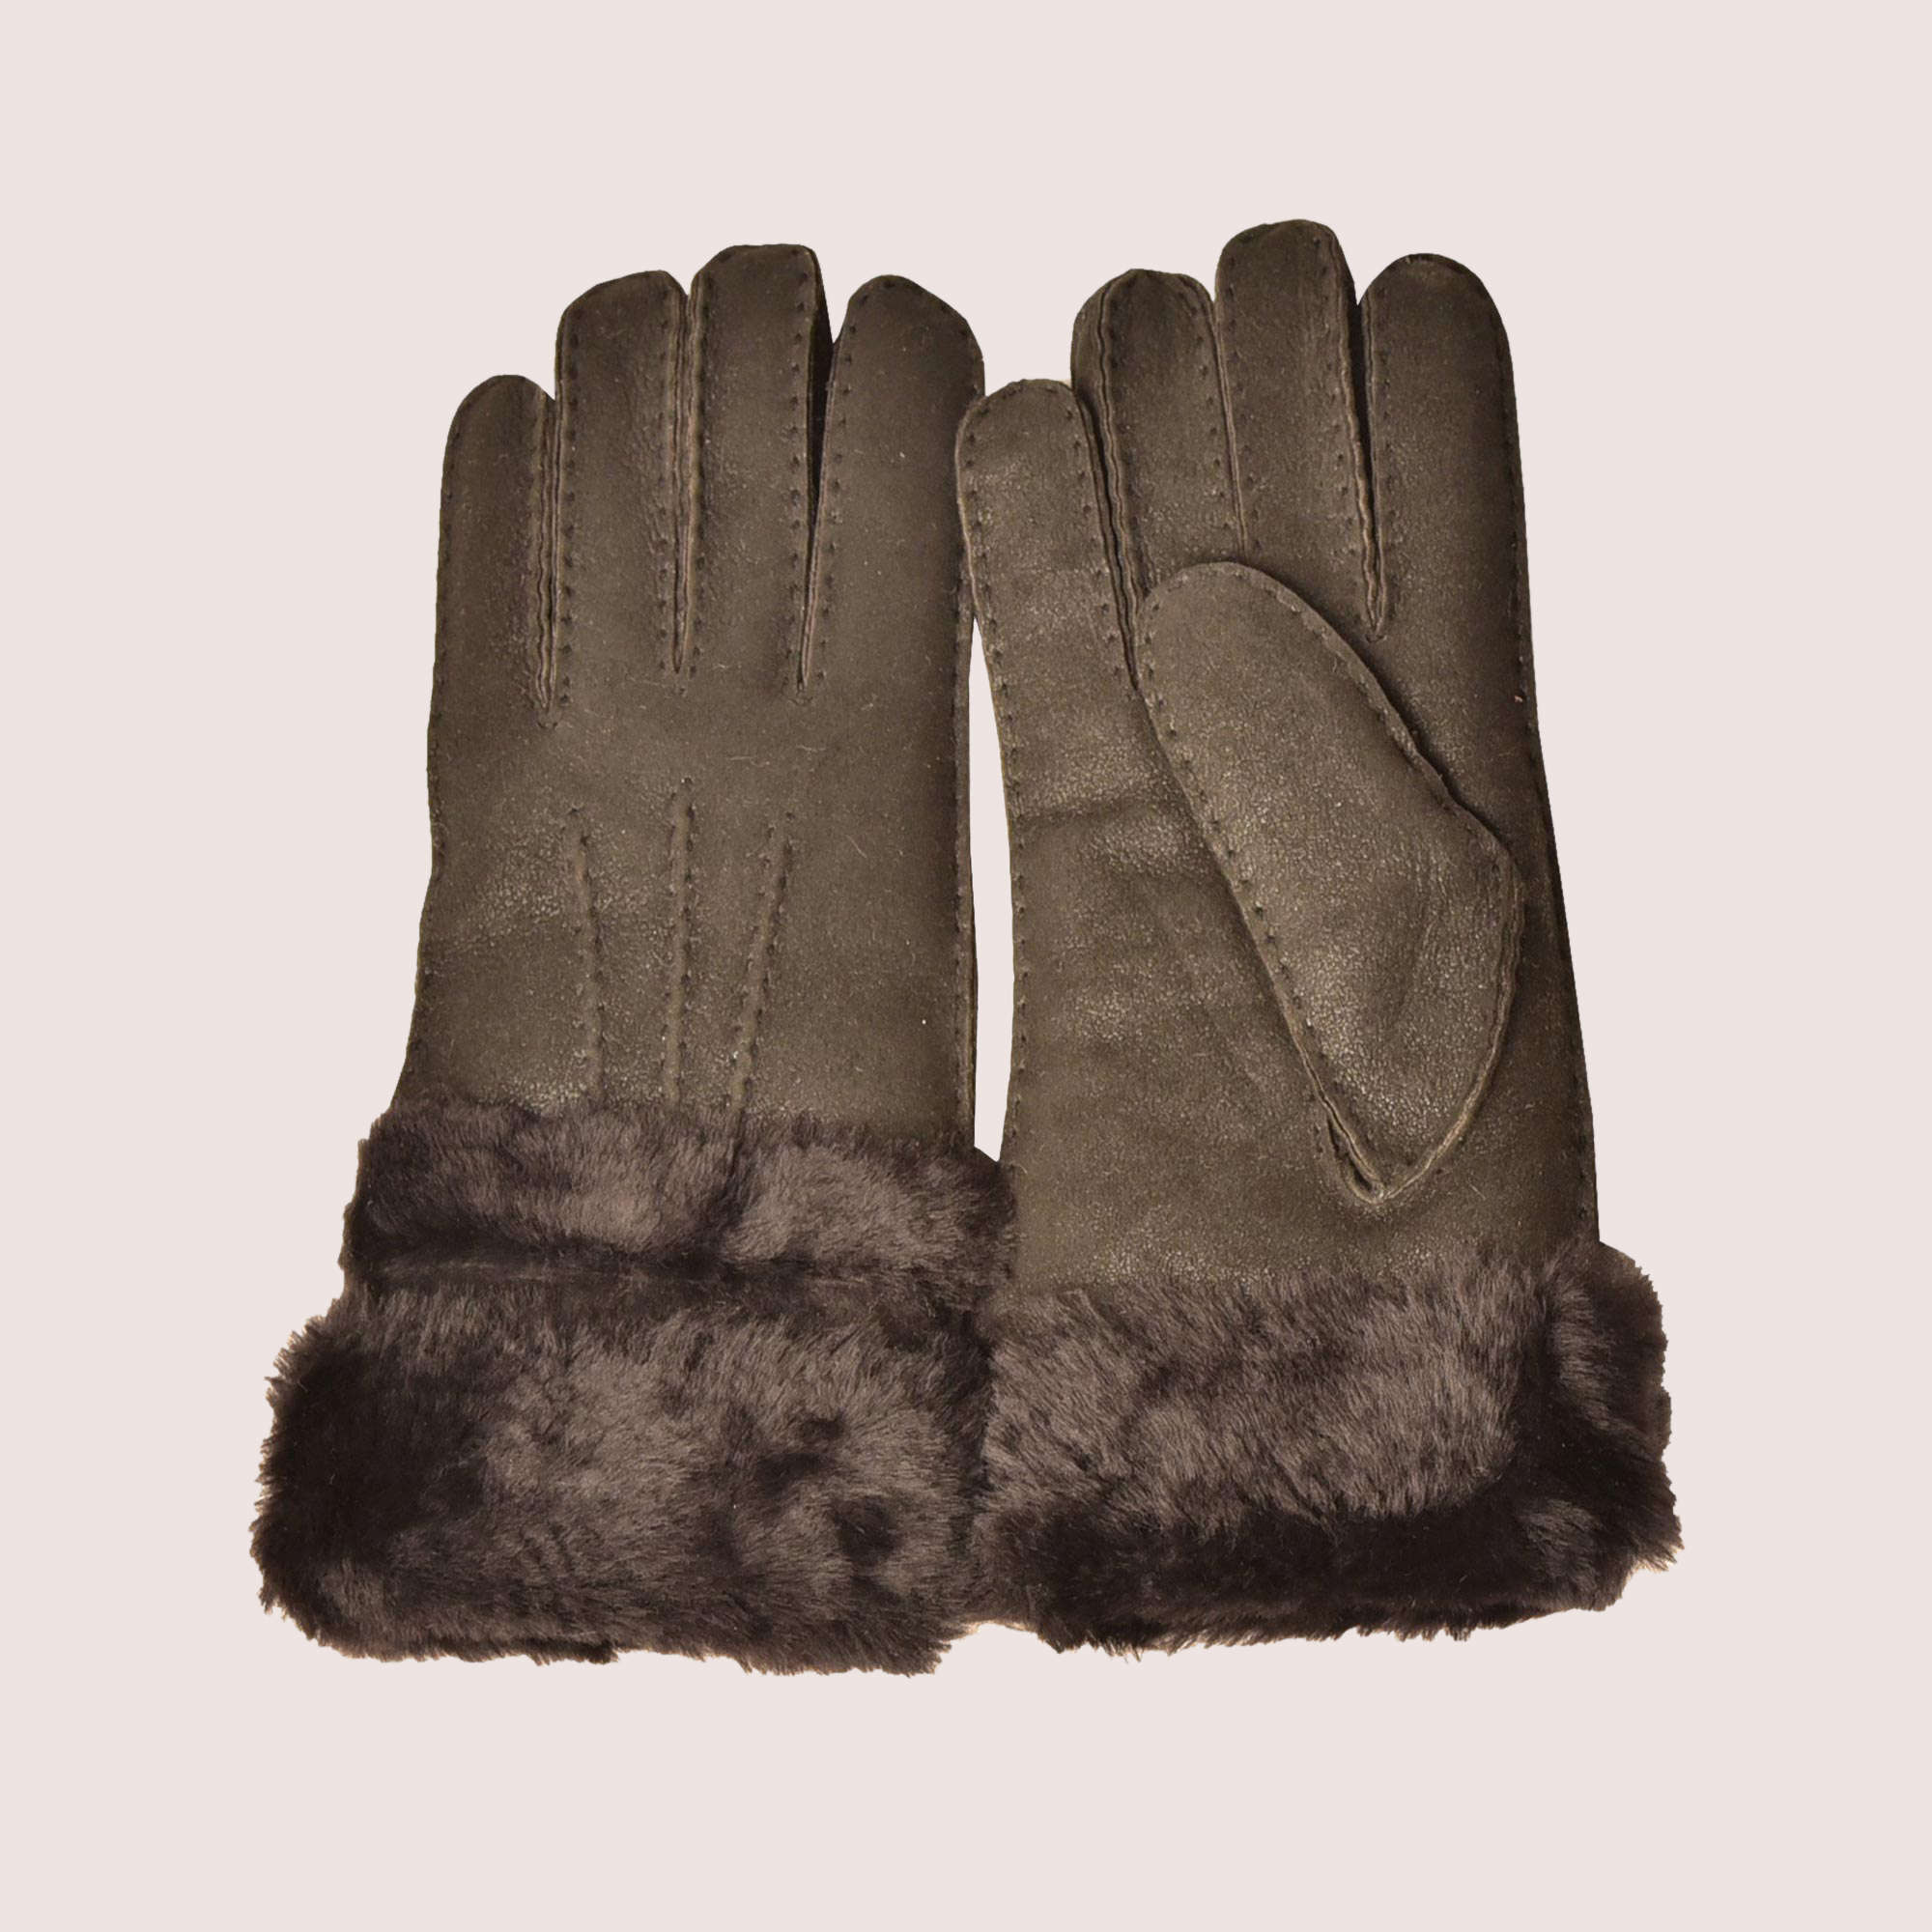 Lizzy Hand-Stitched Shearing Gloves